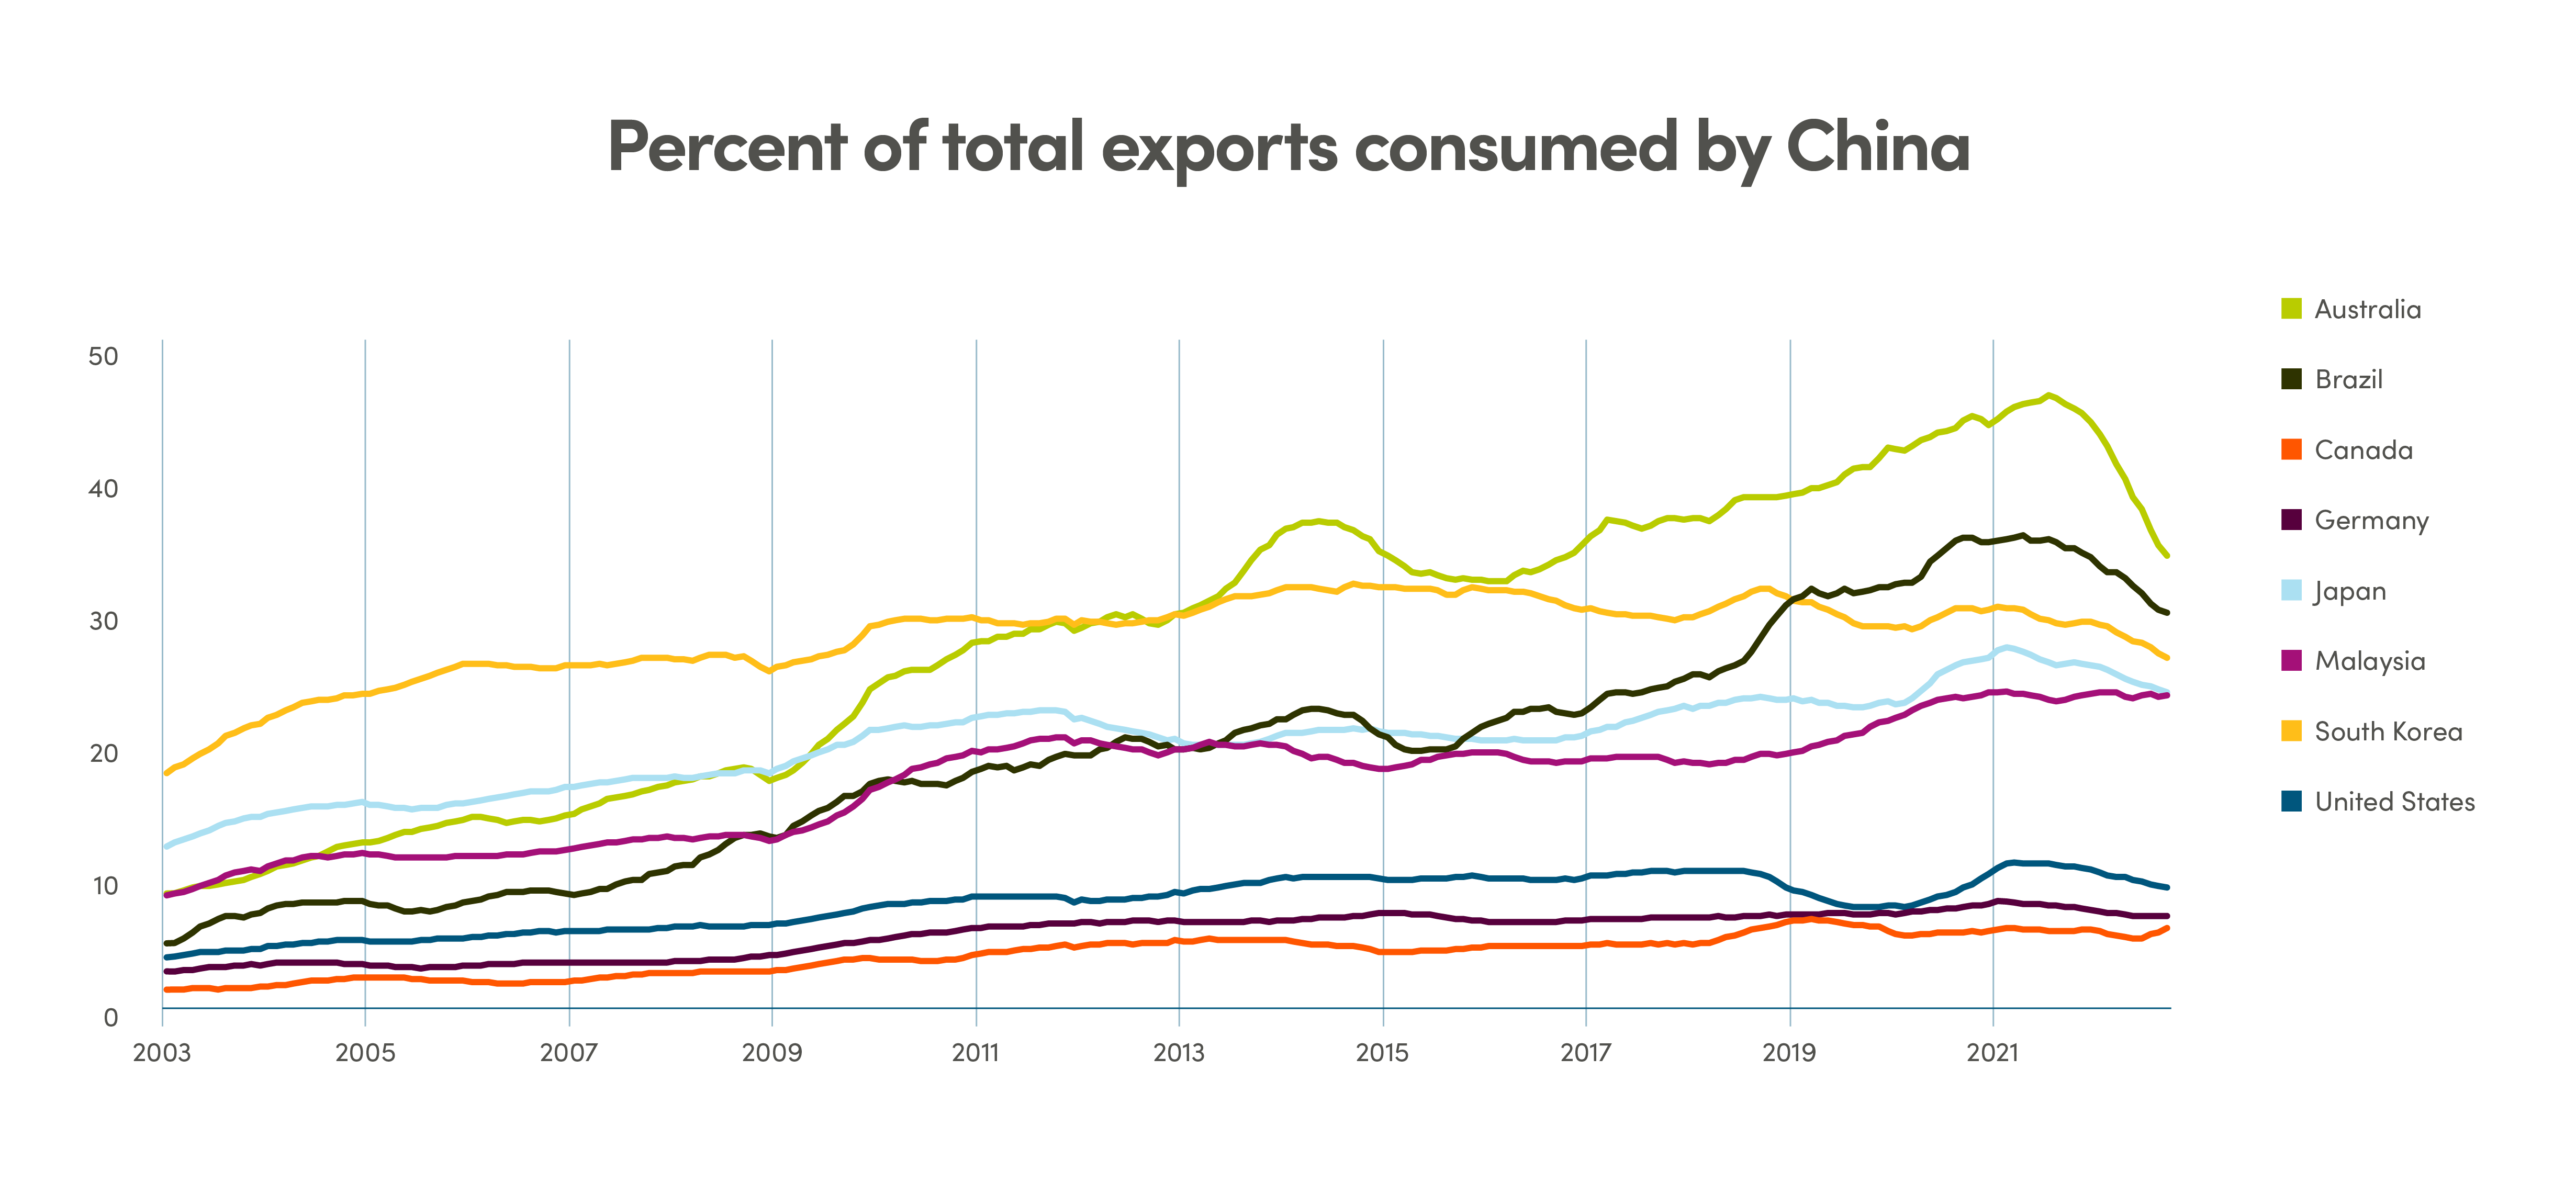 Line graph showing the percent of total exports consumed by China from 2003 to 2022 by country